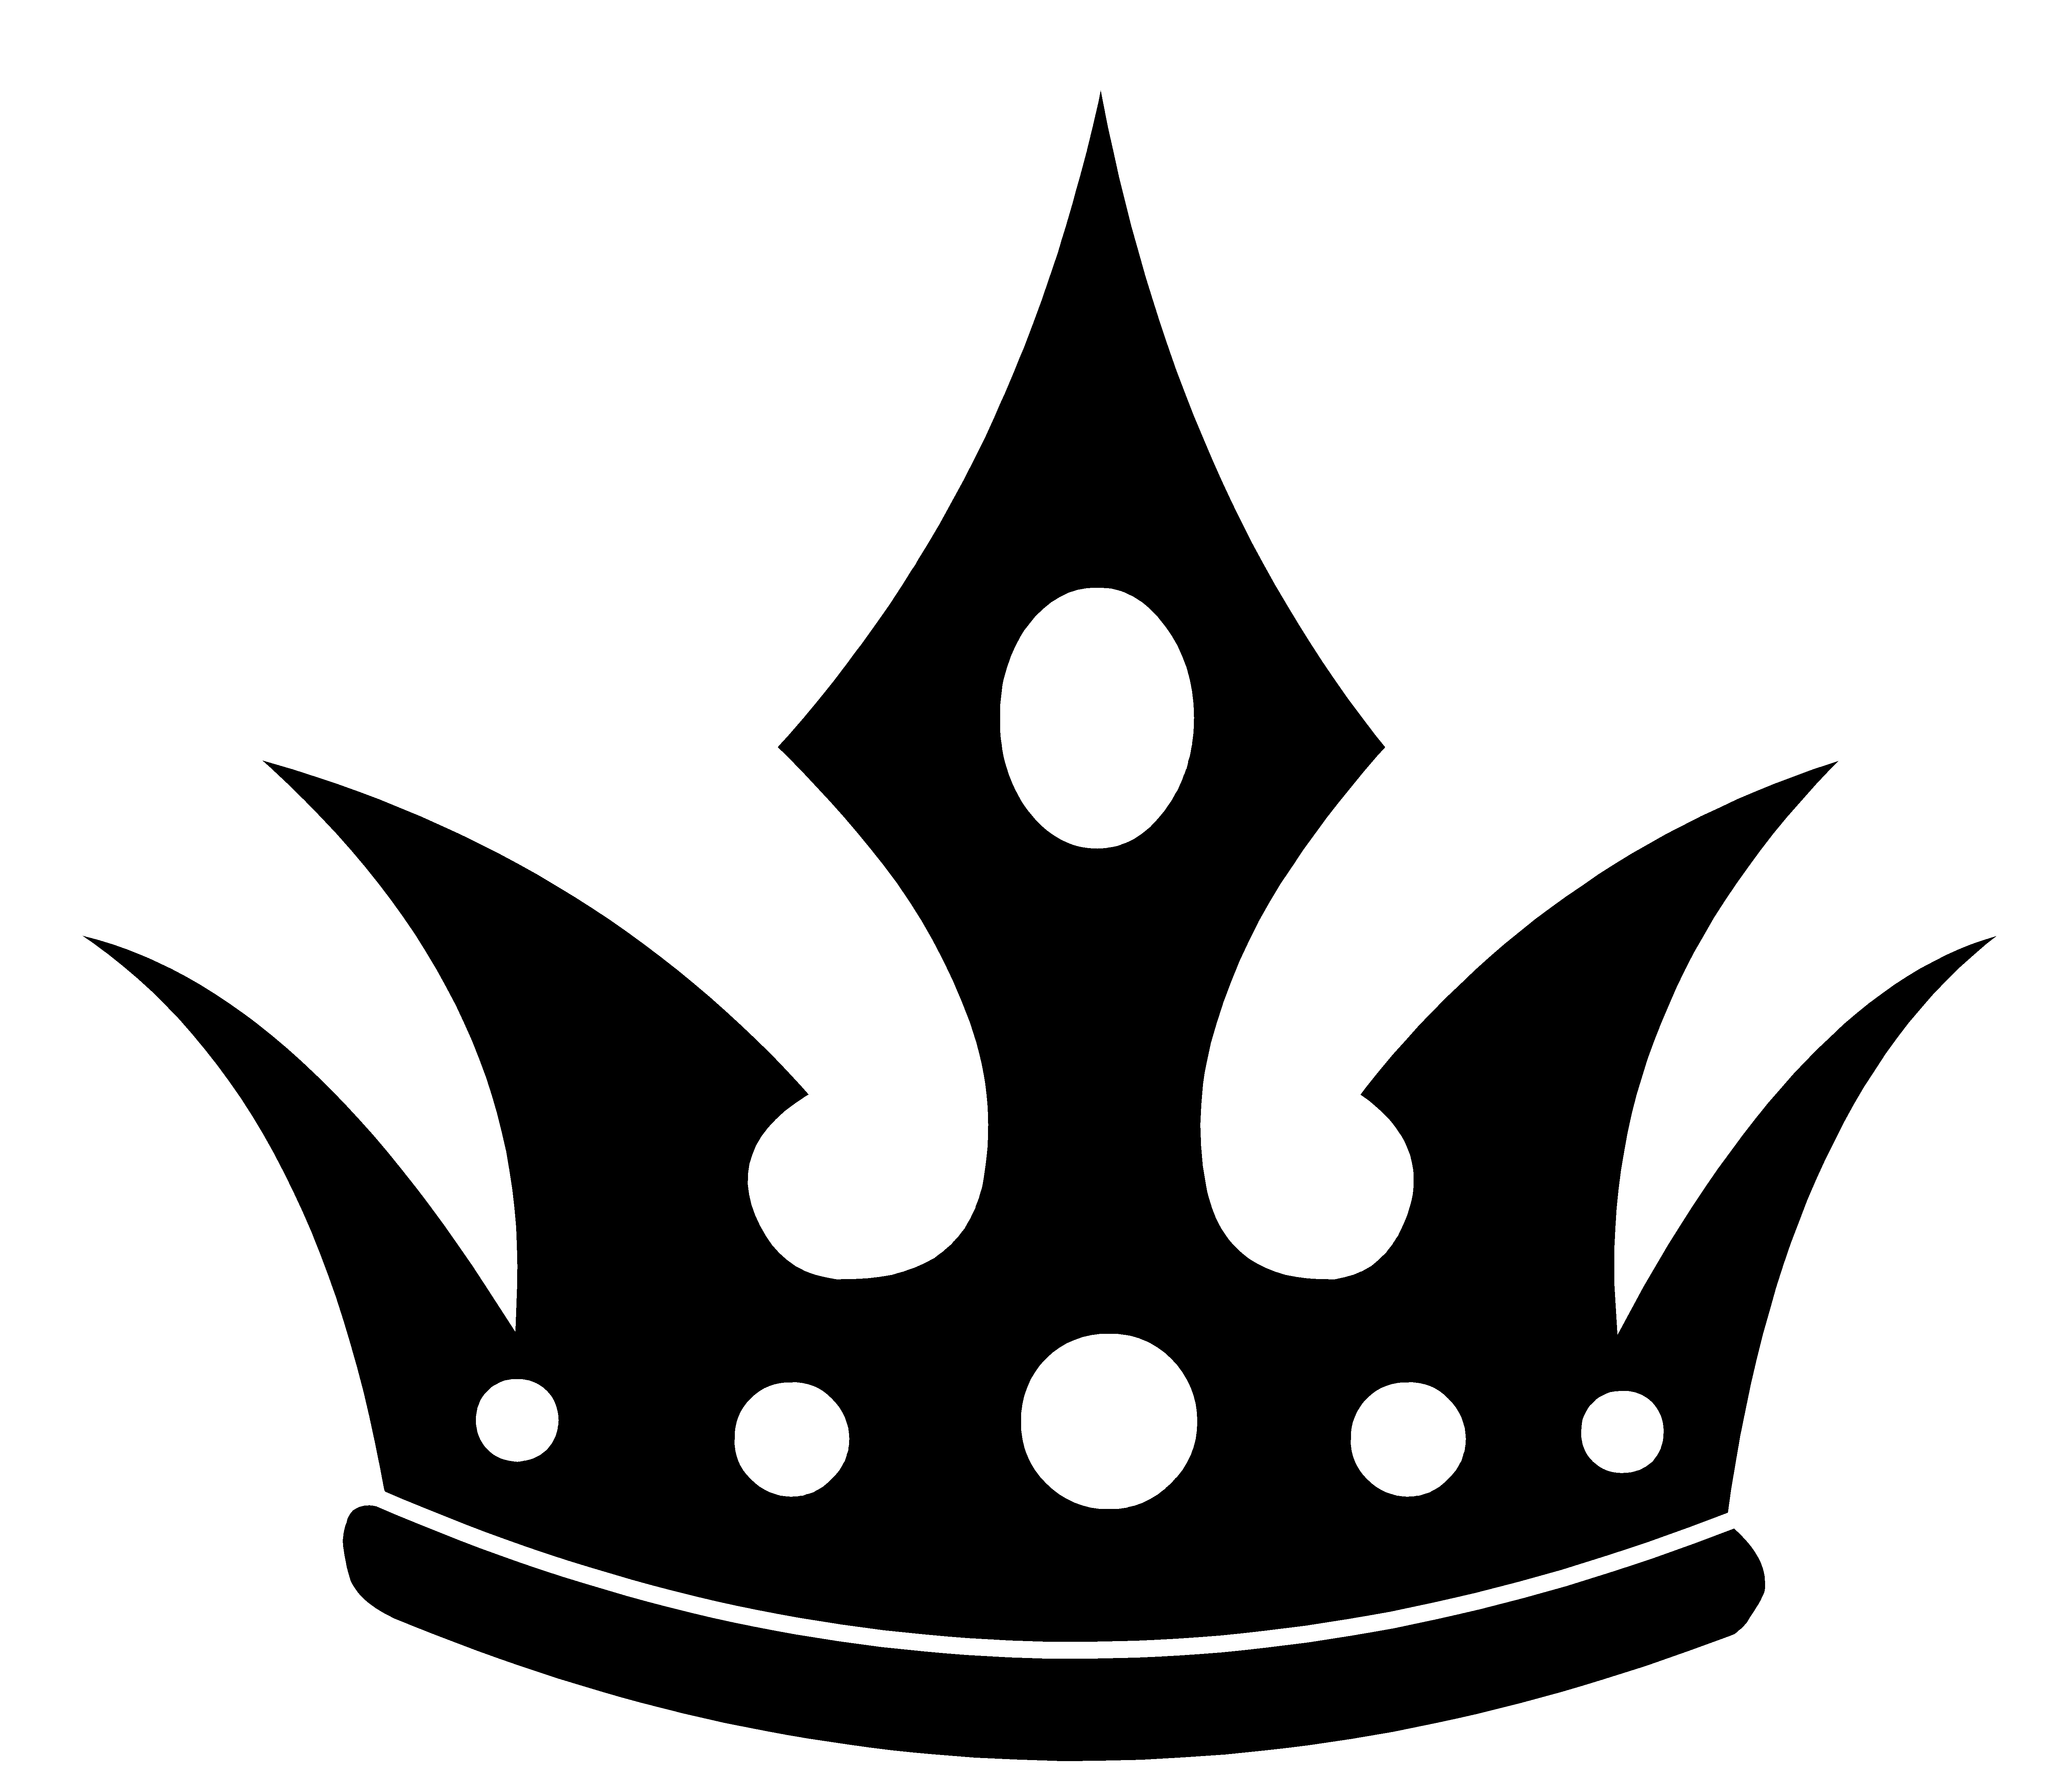 king crown clipart black and white cars